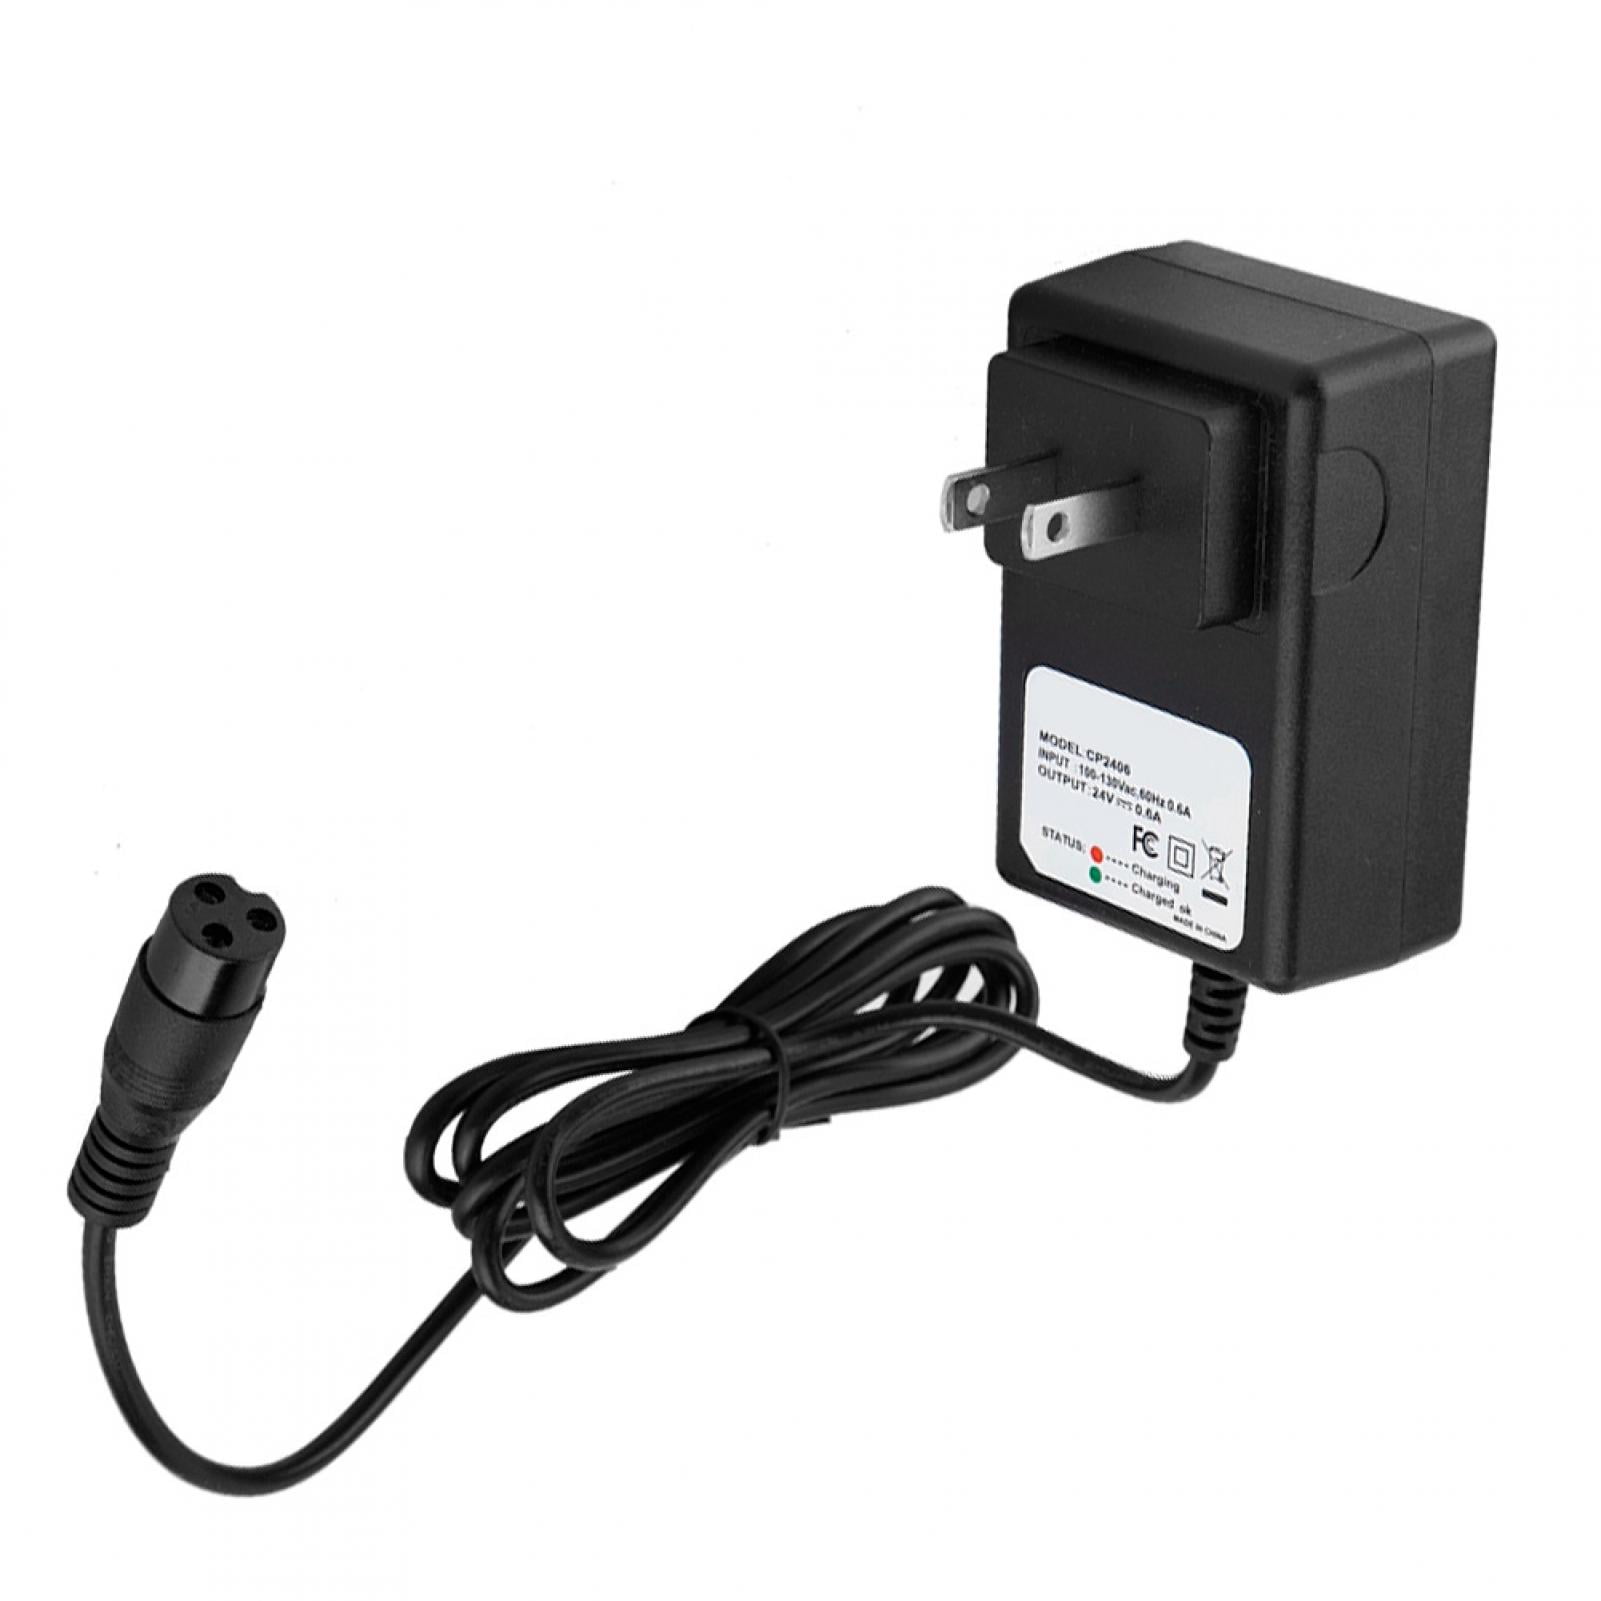 City Express etc 4V 0.6A Electric Scooter Black Battery Charger US Plug 110V,Used for Razor Electric Scooter Battery Charger for Razor E100 E125 E500S PR200 